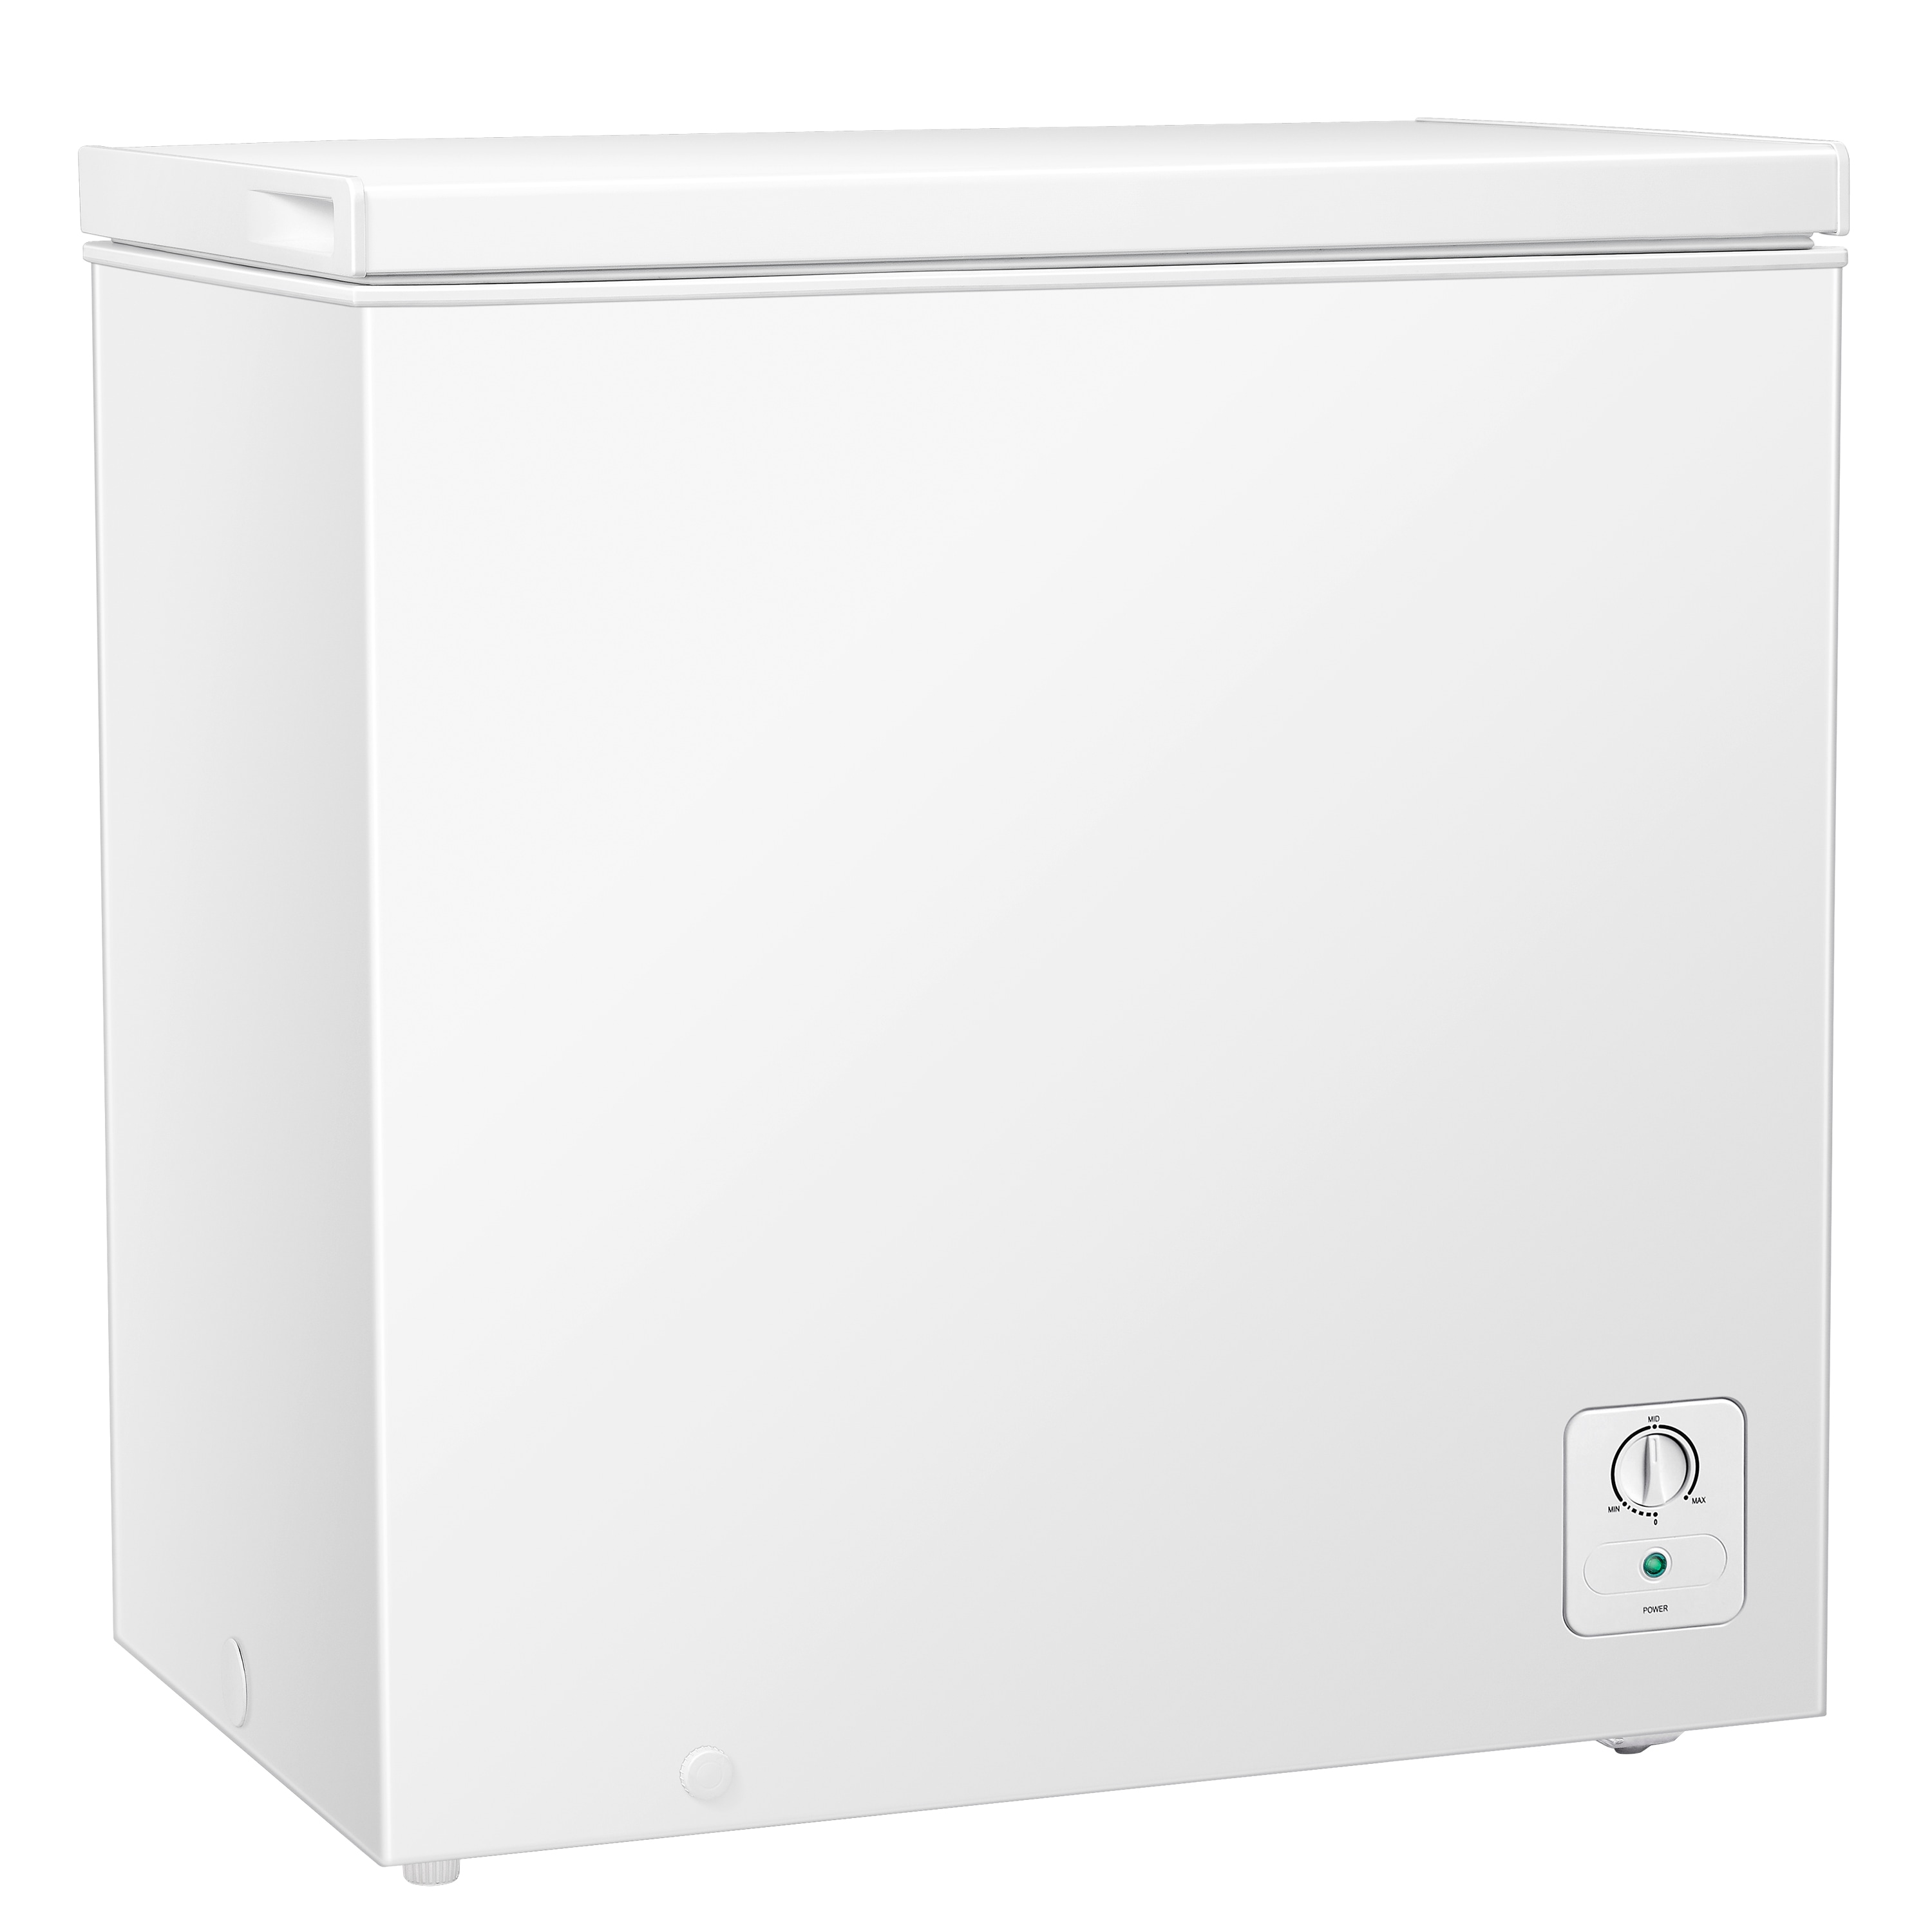 Electric Chest Freezer (7 cubic feet)